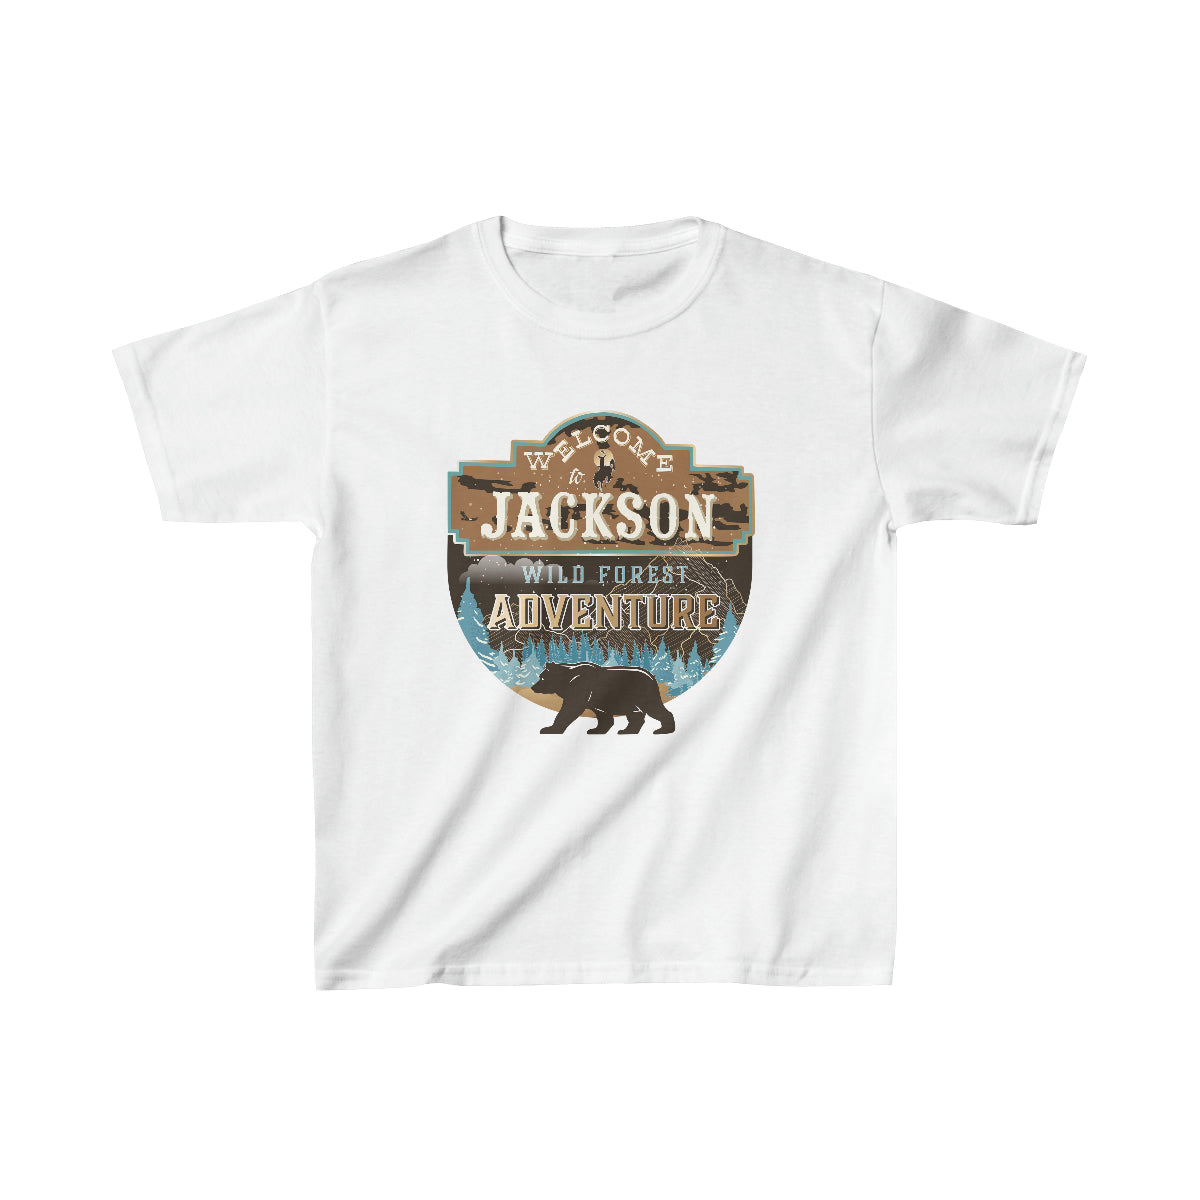 Welcome to Jackson Wyoming Adventure Lovers T-Shirt